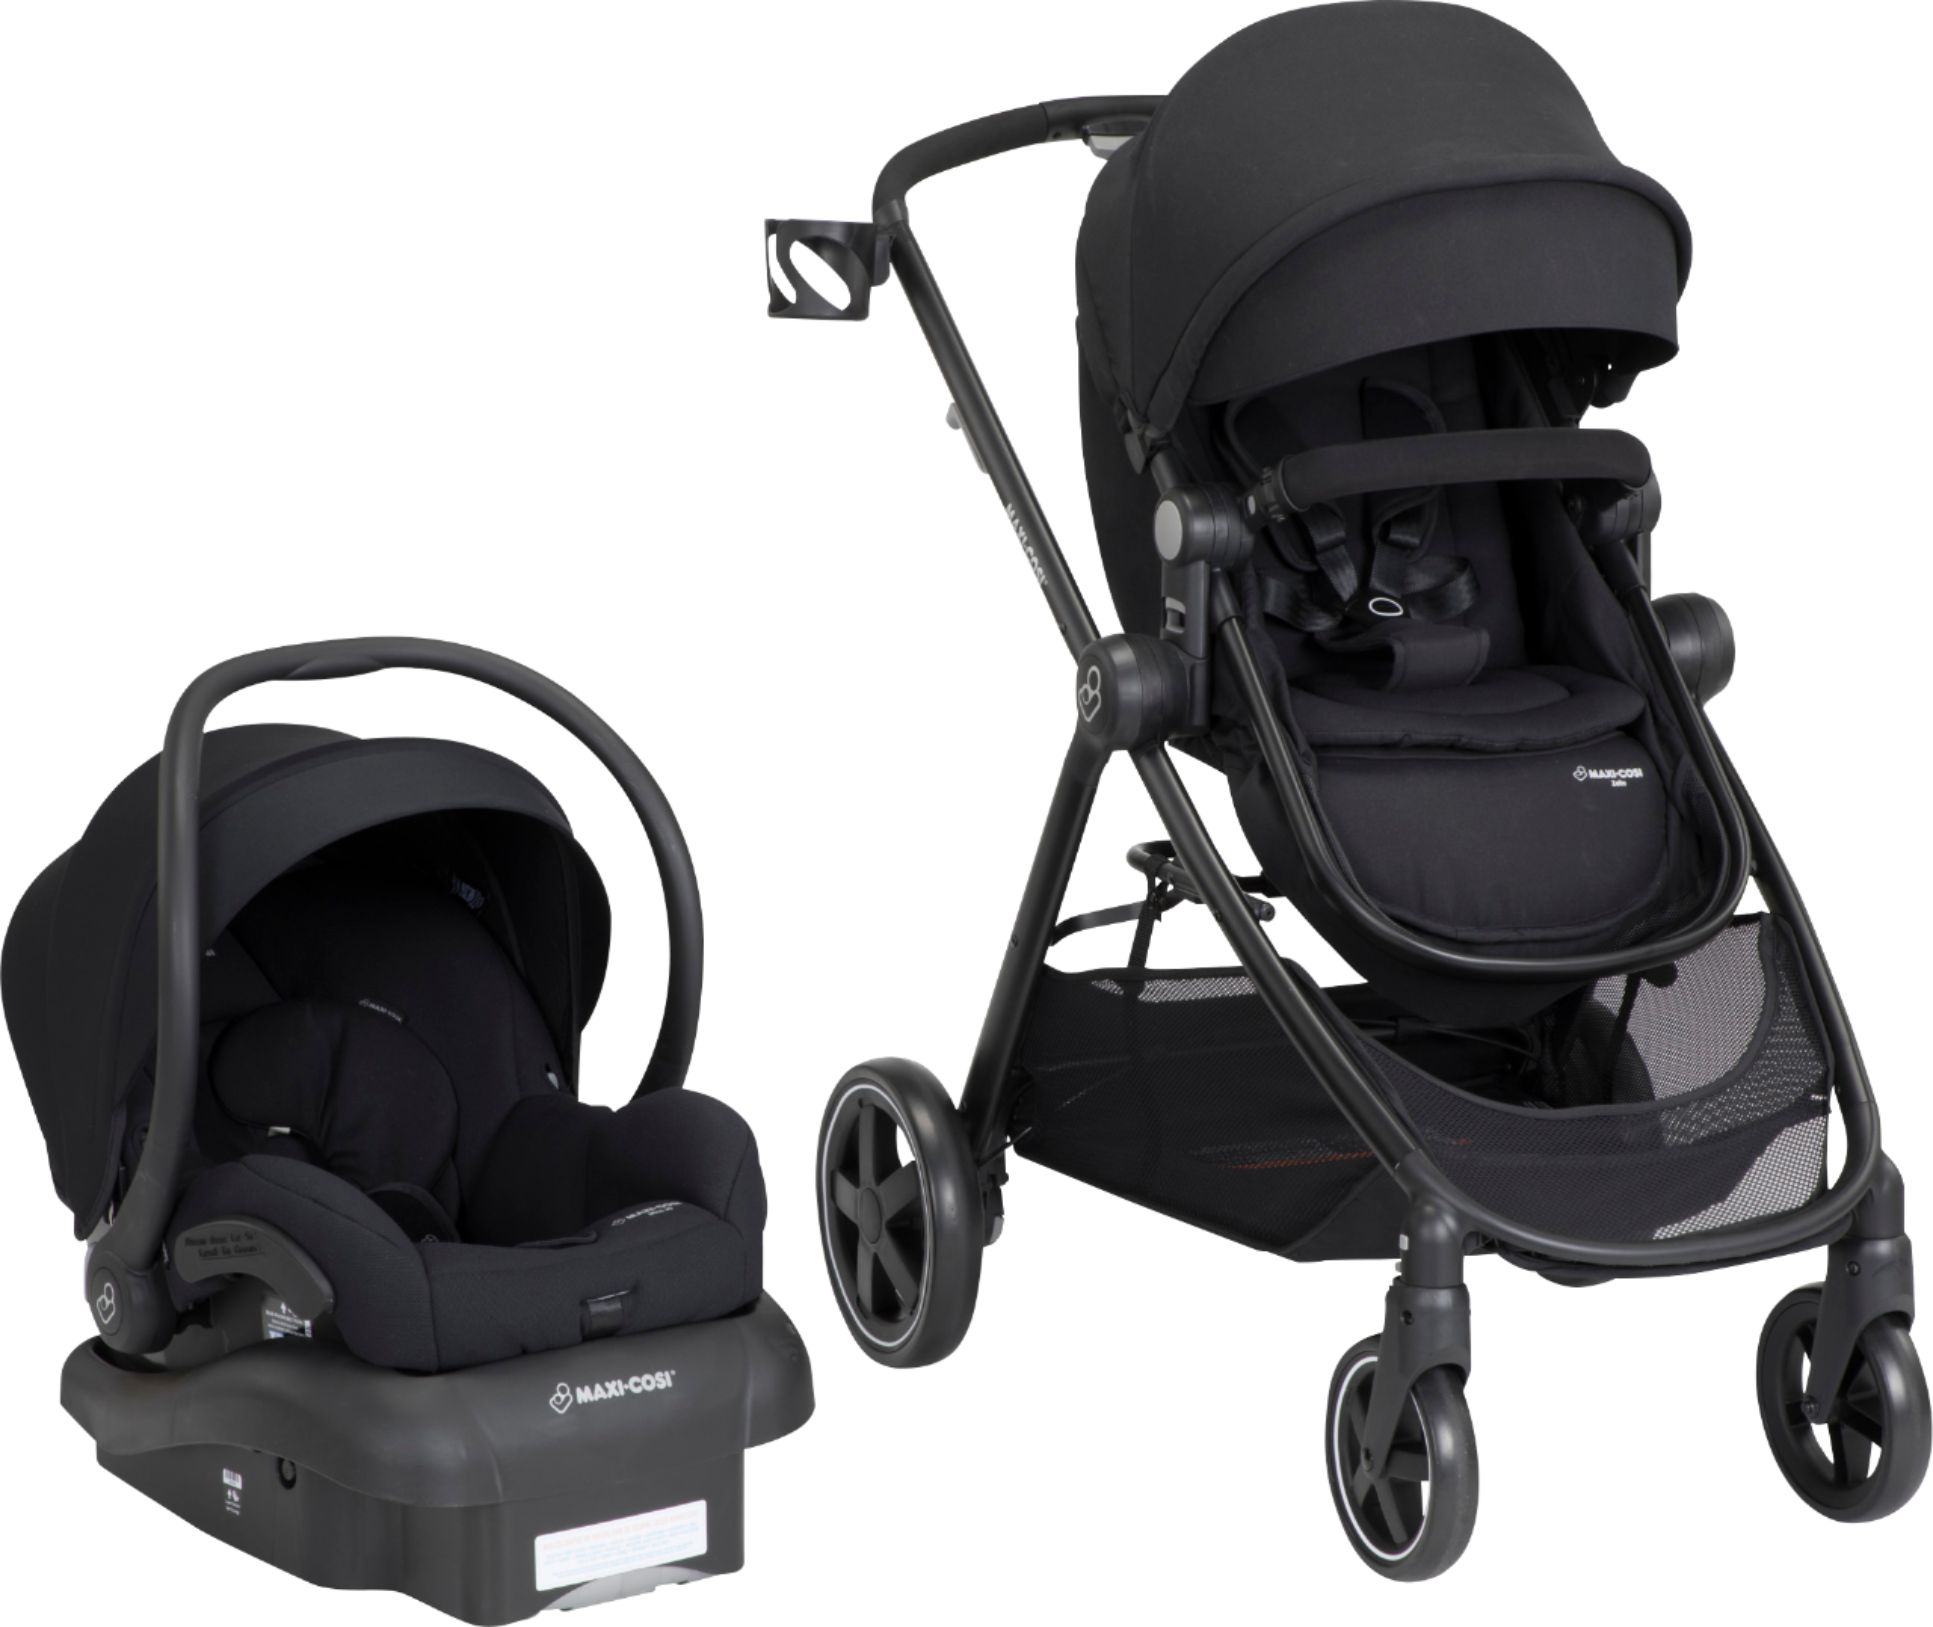 Angle View: Maxi-Cosi - Zelia 5-in-1 Modular Travel System - Black